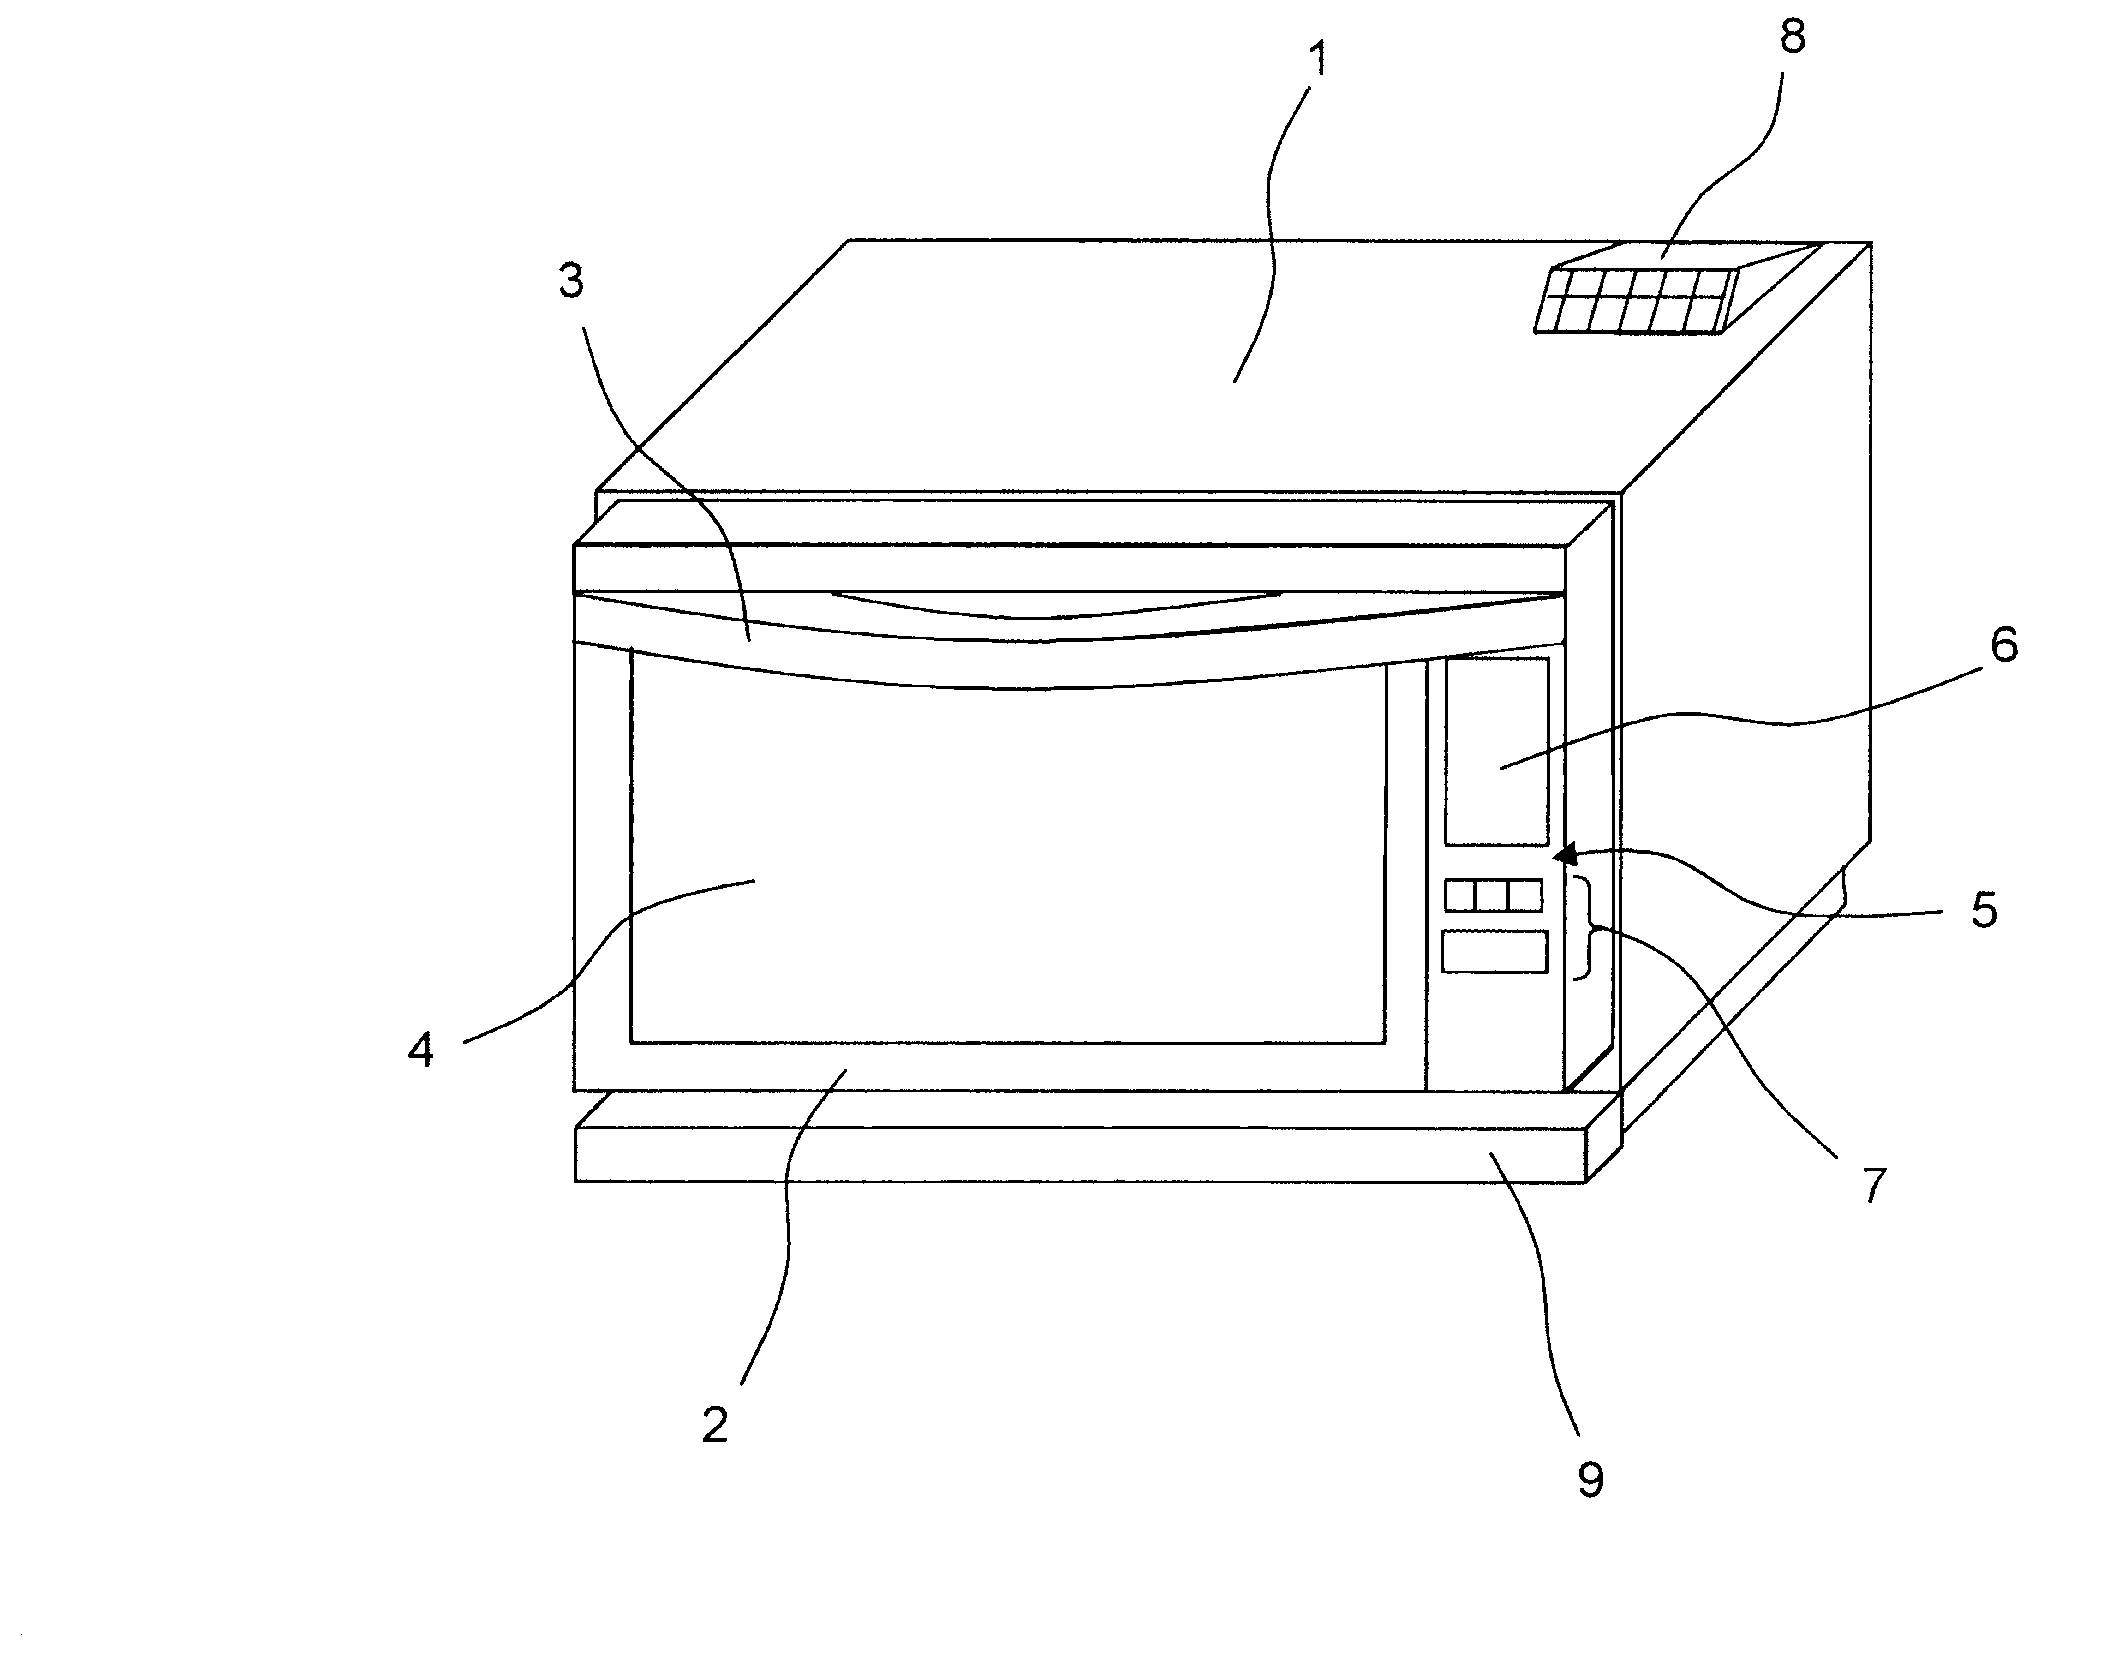 Cooker and display device